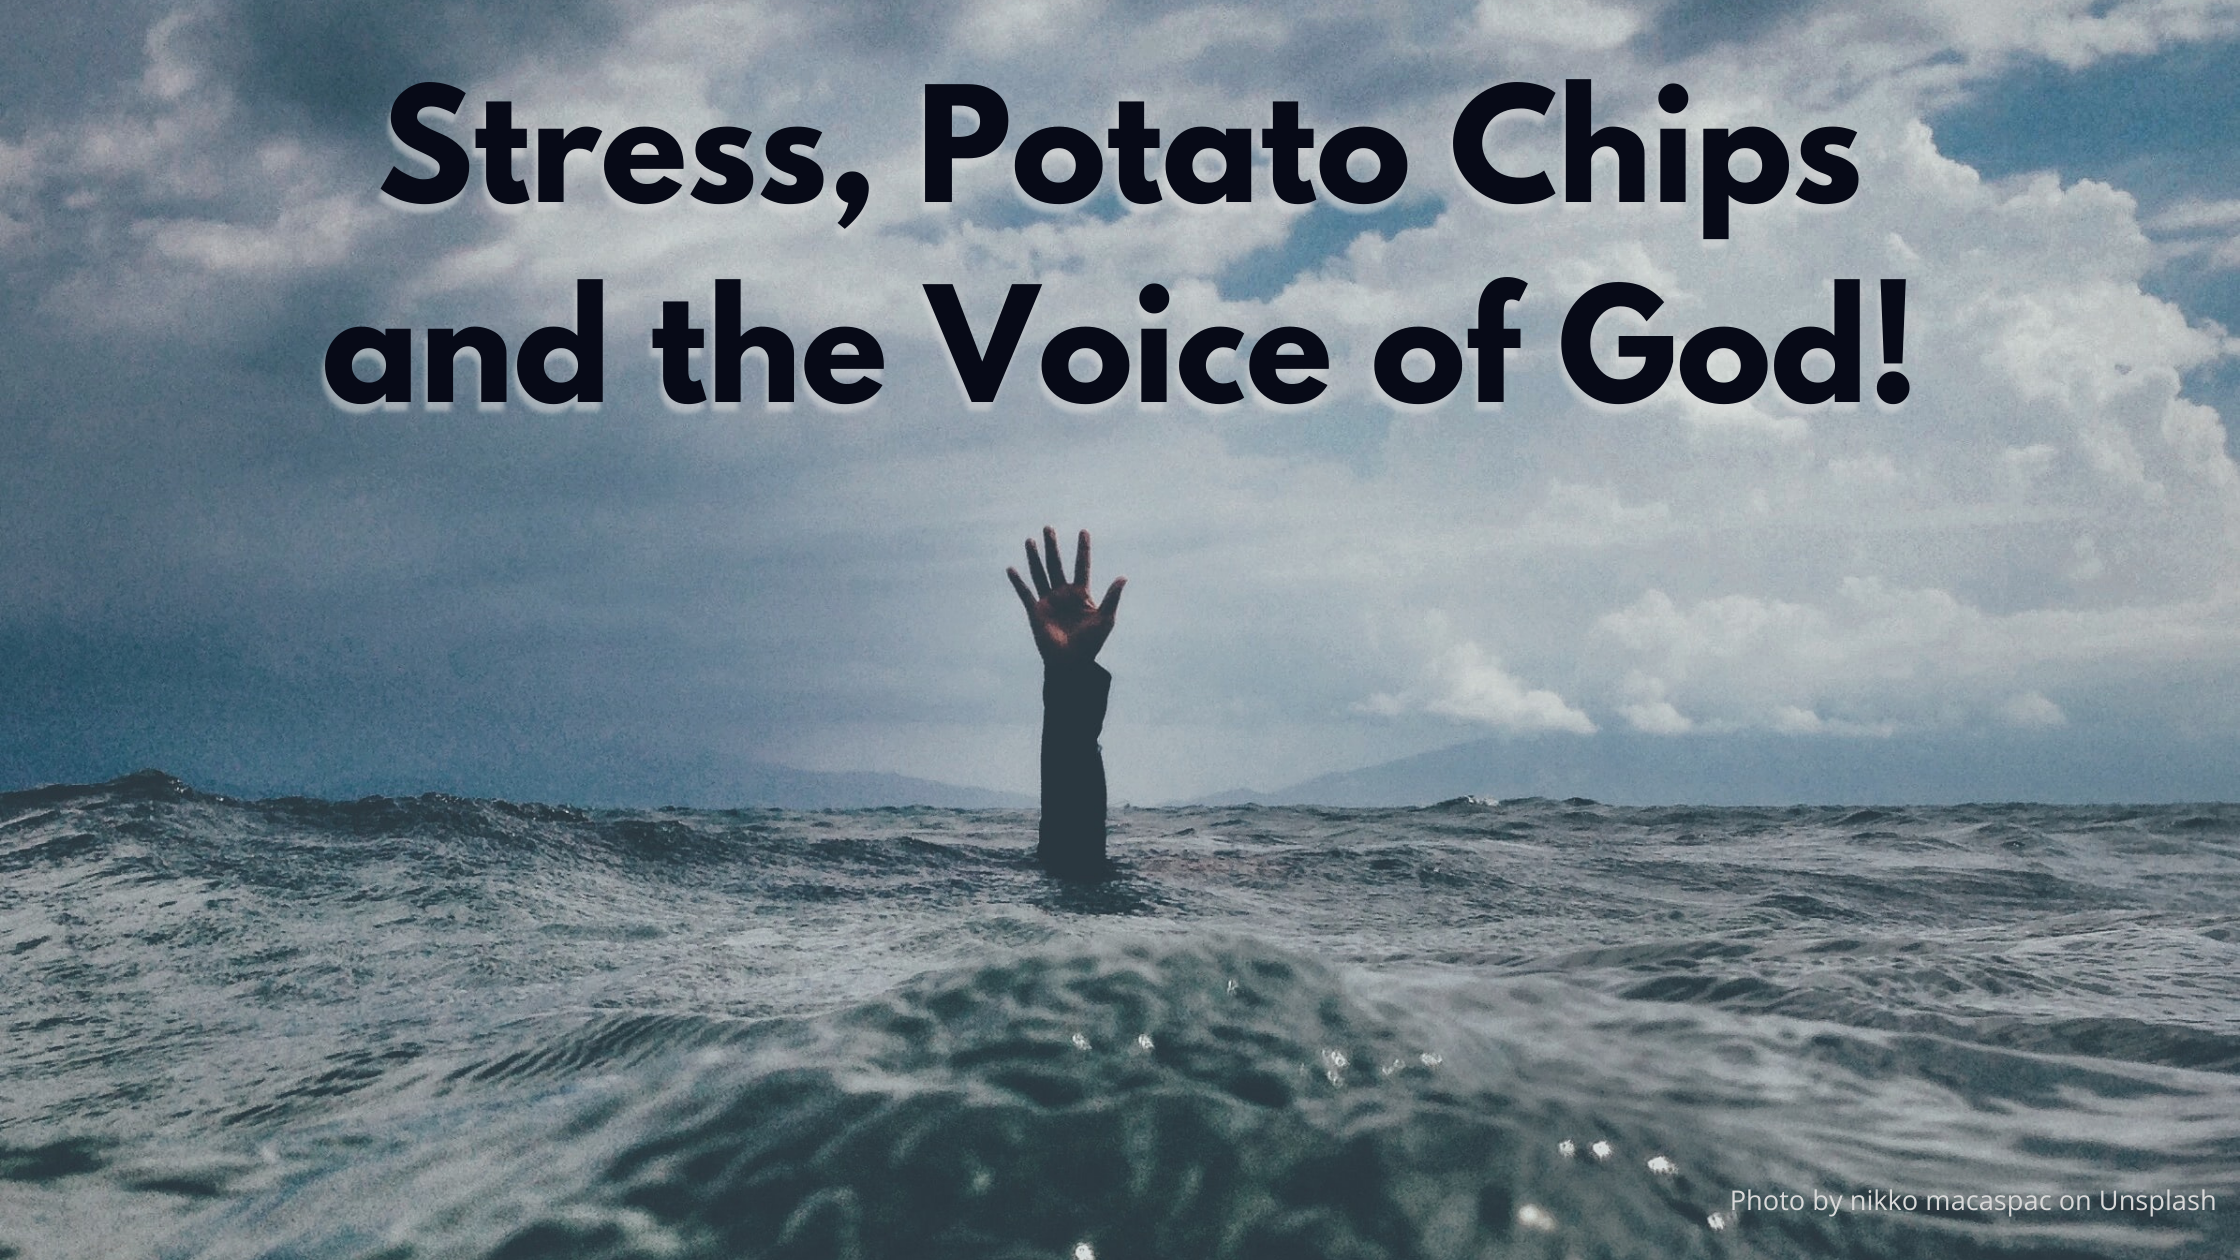 Stress, Potato Chips and the Voice of God!